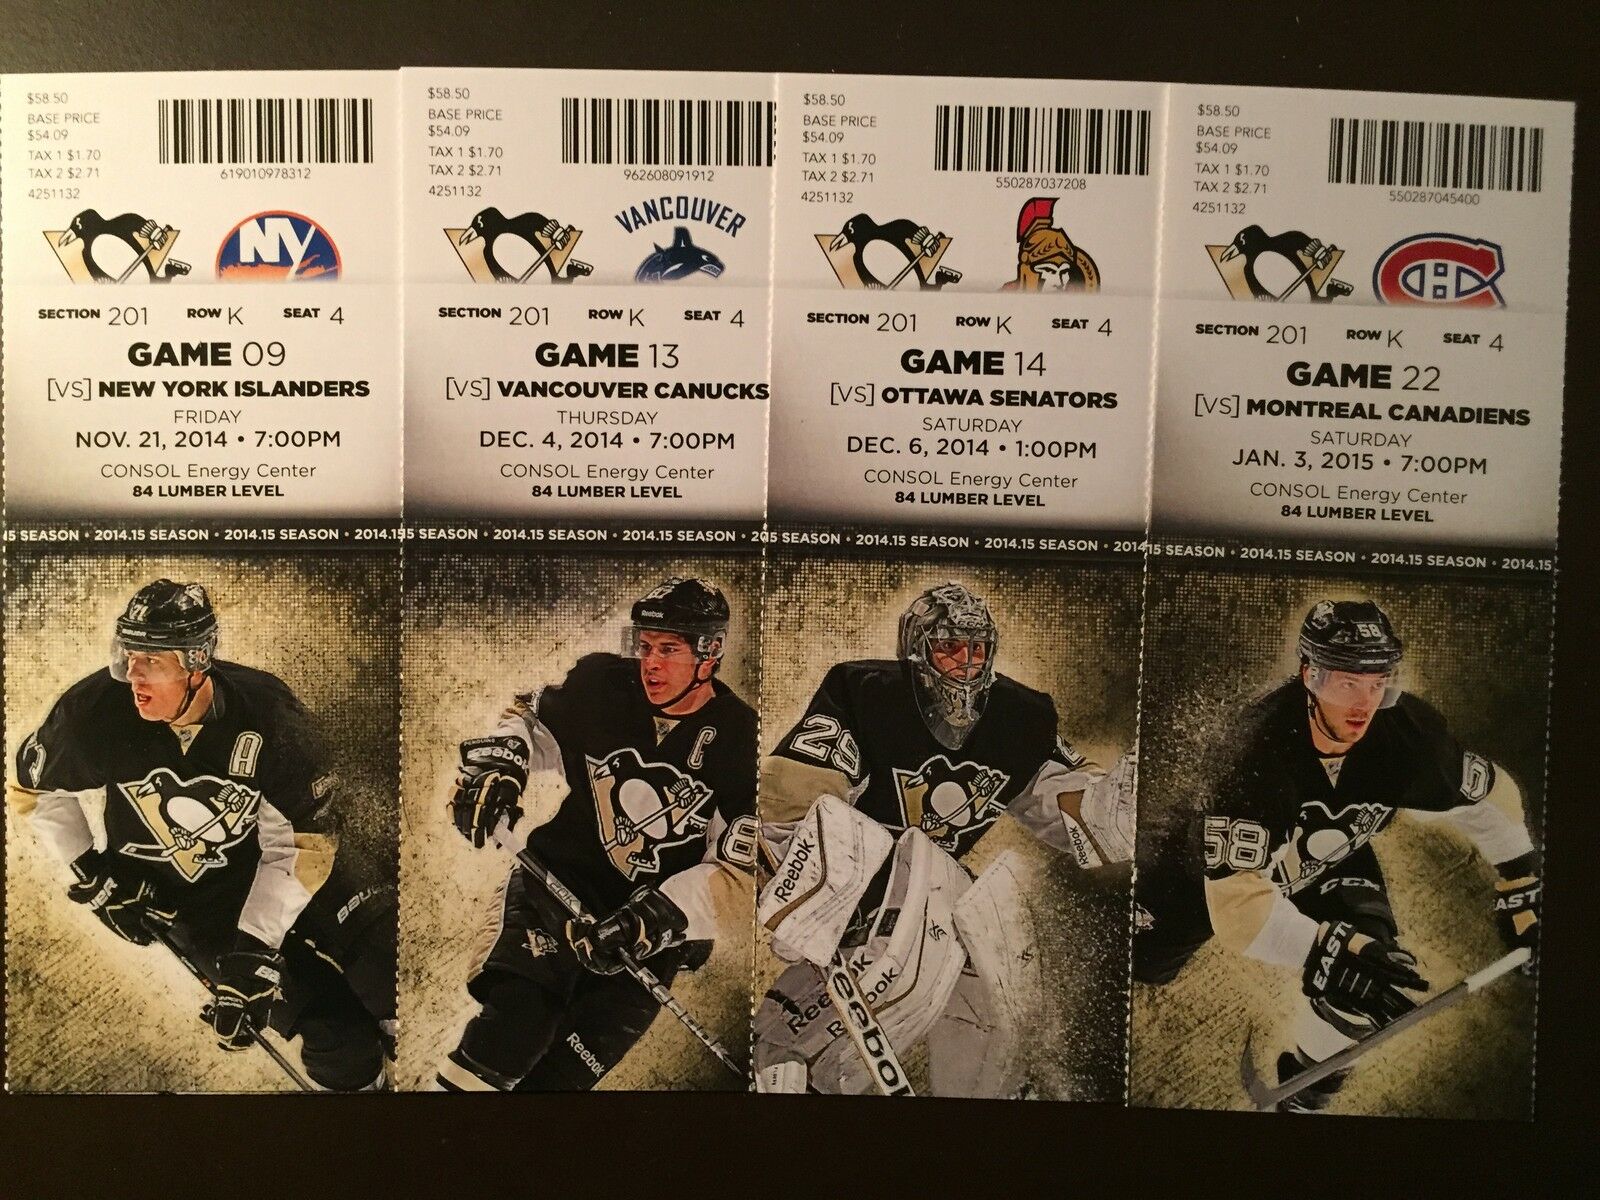 Pittsburgh Penguins 2014-15 Nhl Ticket Stubs - One Ticket - See Listing